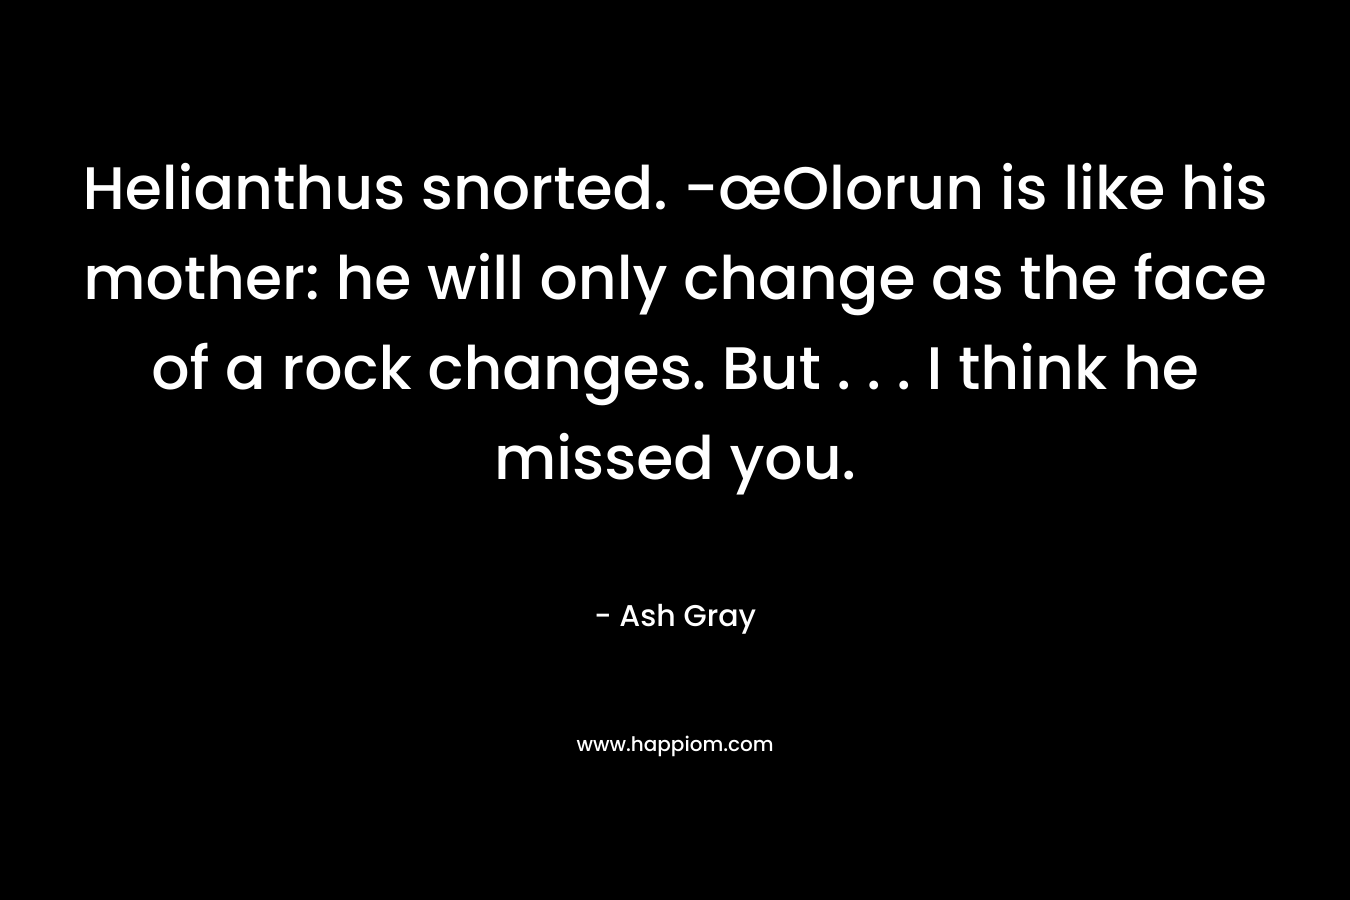 Helianthus snorted. -œOlorun is like his mother: he will only change as the face of a rock changes. But . . . I think he missed you. – Ash Gray